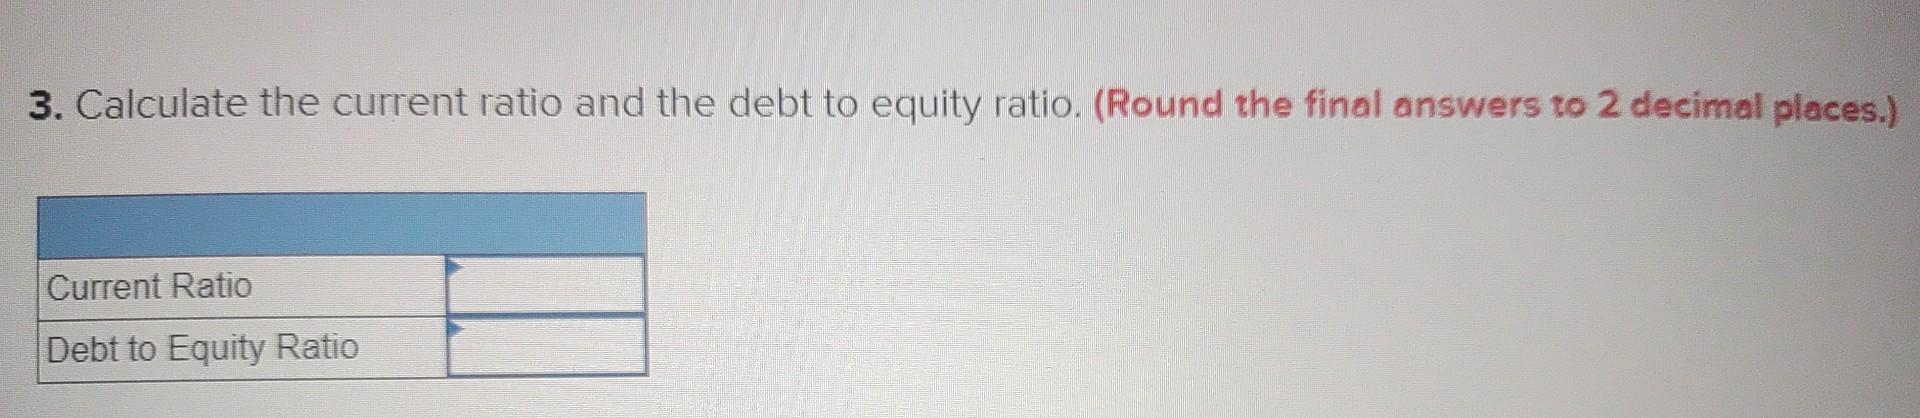 3. Calculate the current ratio and the debt to equity ratio. (Round the final answers to 2 decimal places.)